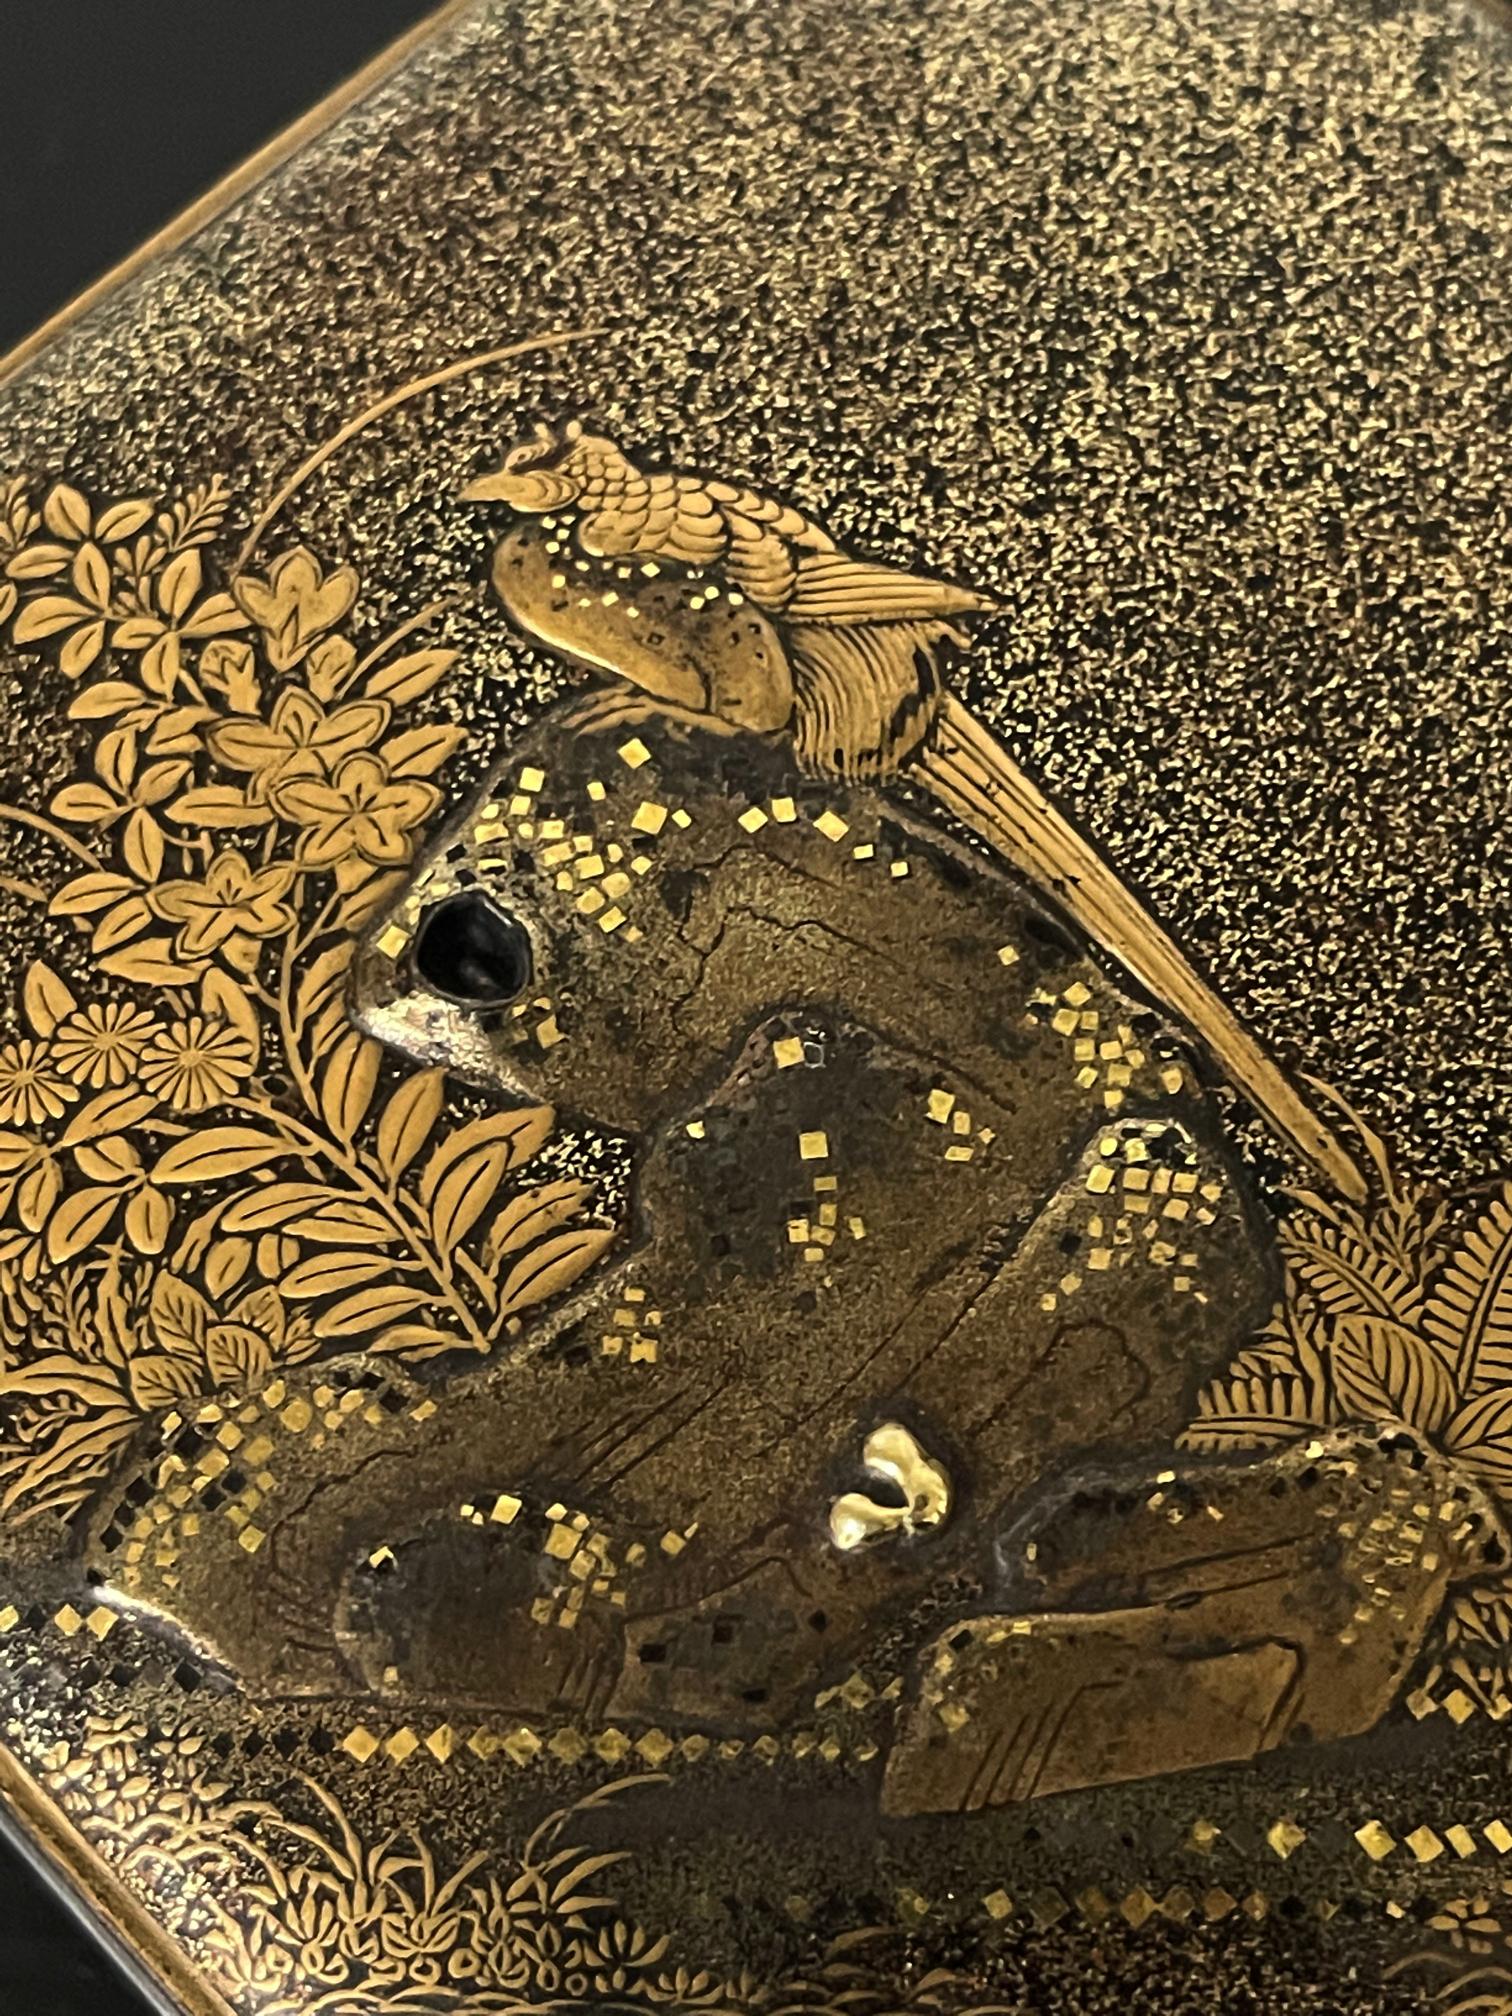 Exquisite Early Japanese Lacquer Kobako Box with Insert Tray 5